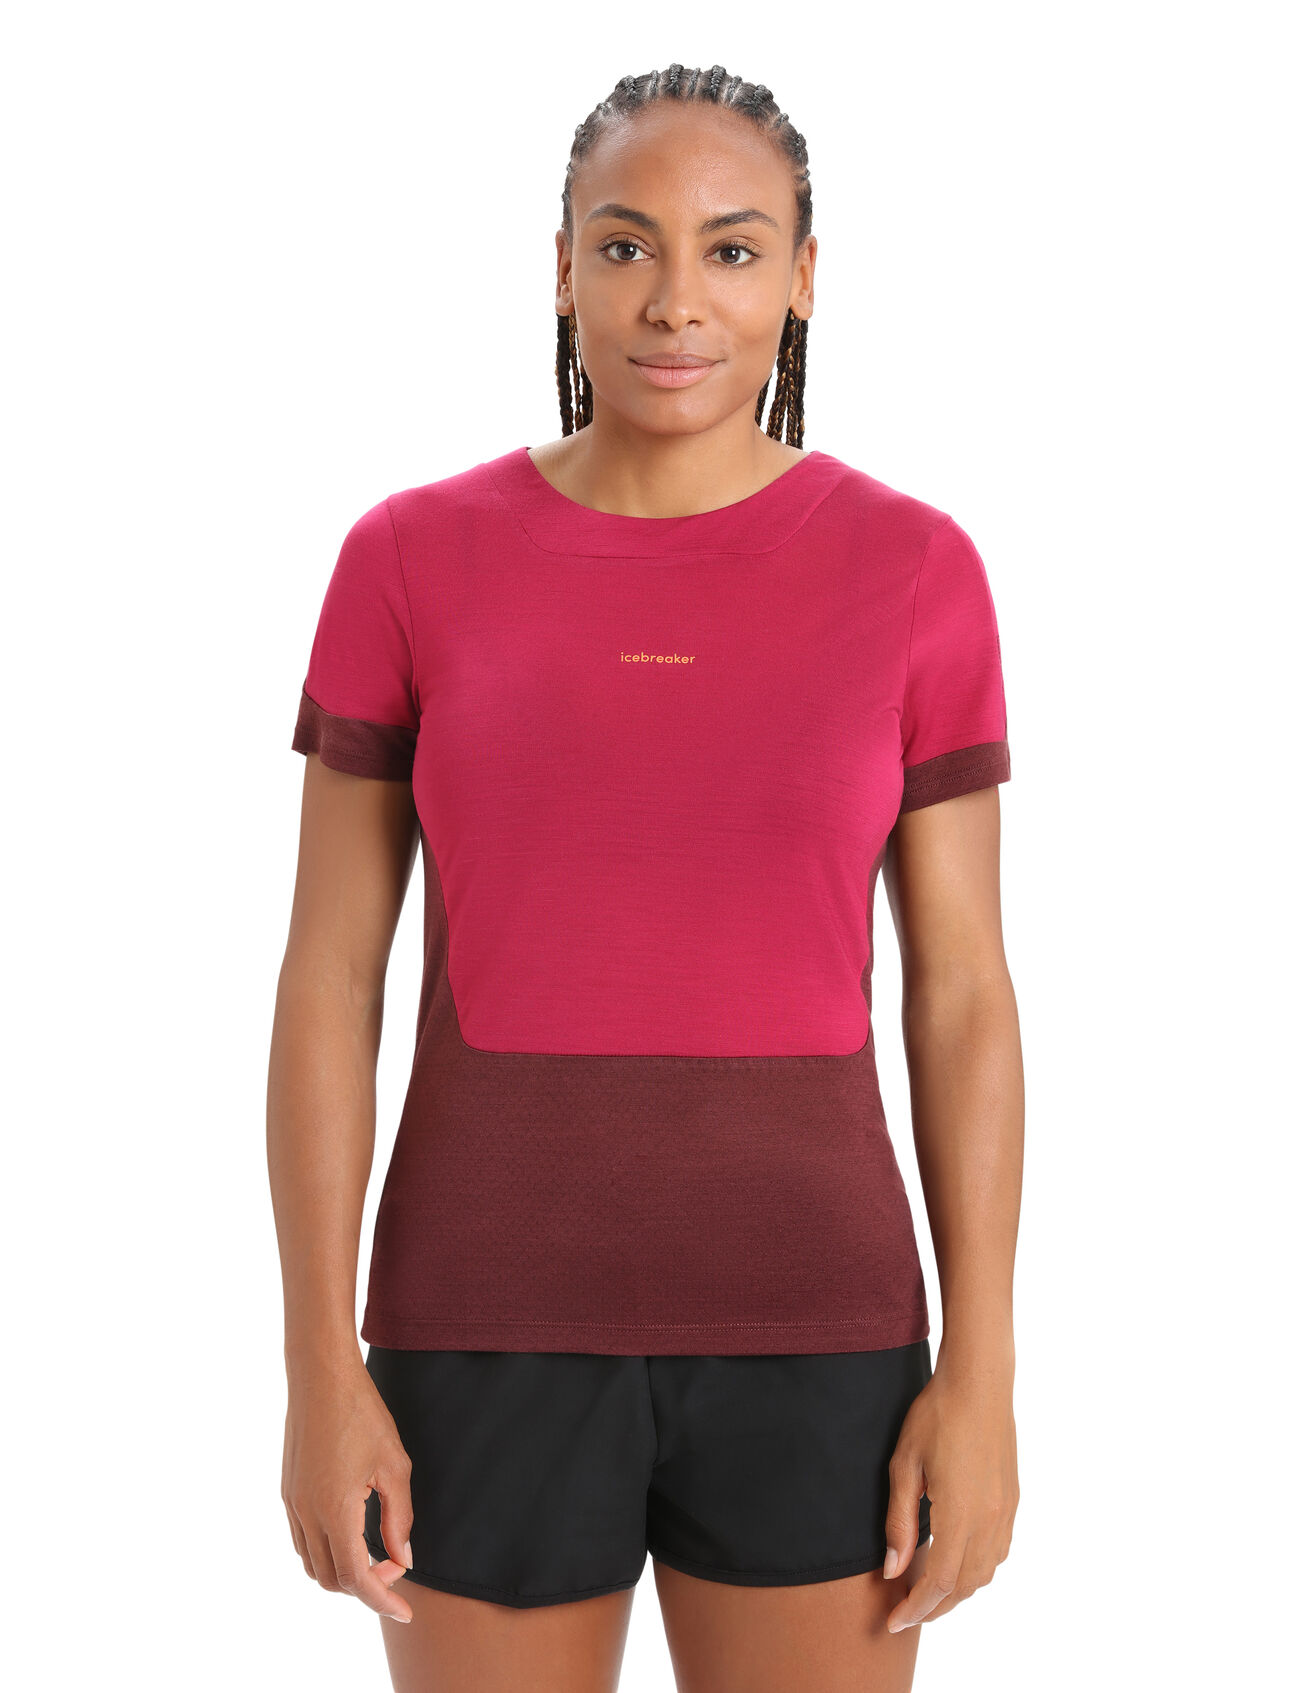 Womens ZoneKnit™ Merino Short Sleeve Slit Back T-Shirt Our most breathable and lightweight tee designed for maximum breathability during high-output activities, the ZoneKnit™ Short Sleeve Slit Back Tee combines Cool-Lite™ jersey fabric with our ZoneKnit™ body-mapped ventilation.